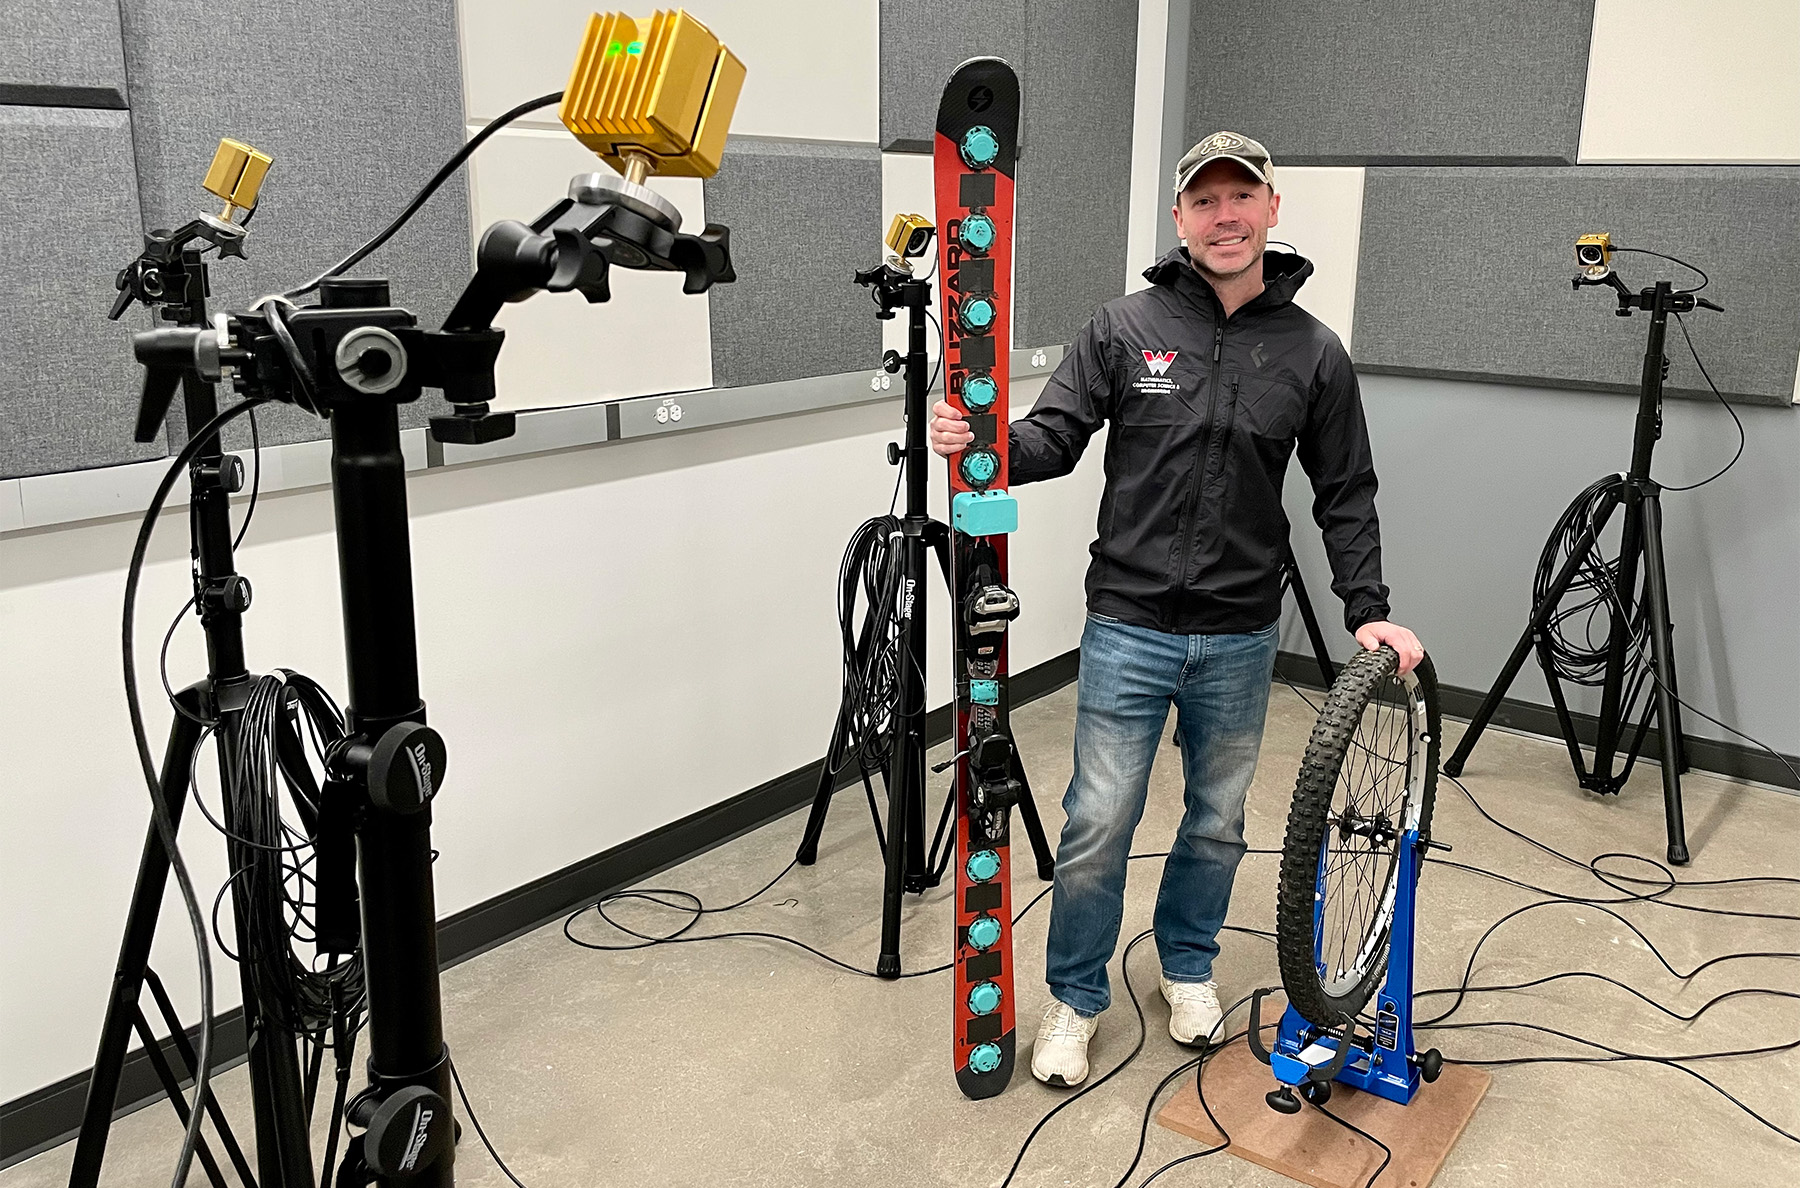 On GEAR:30, Sean Humbert joins us to give an update on Blister Labs, and they also discuss the movie Real Genius; flies; ski testing and dynamic modeling; math and slarving; and more.